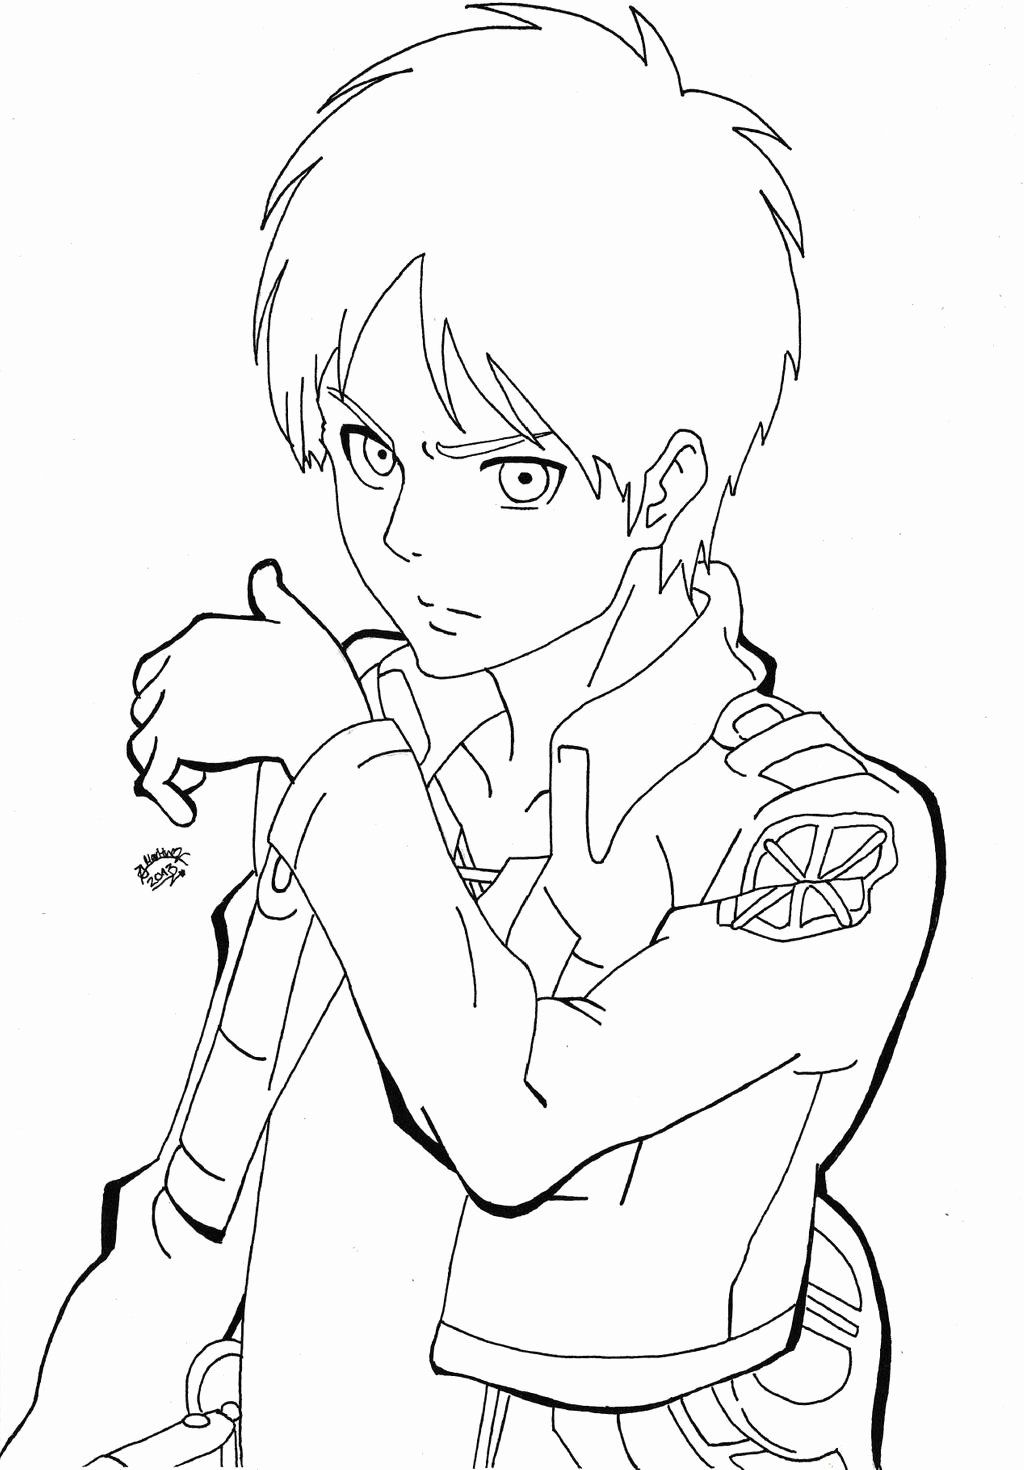 Anime Coloring Pages Aot - Coloring and Drawing